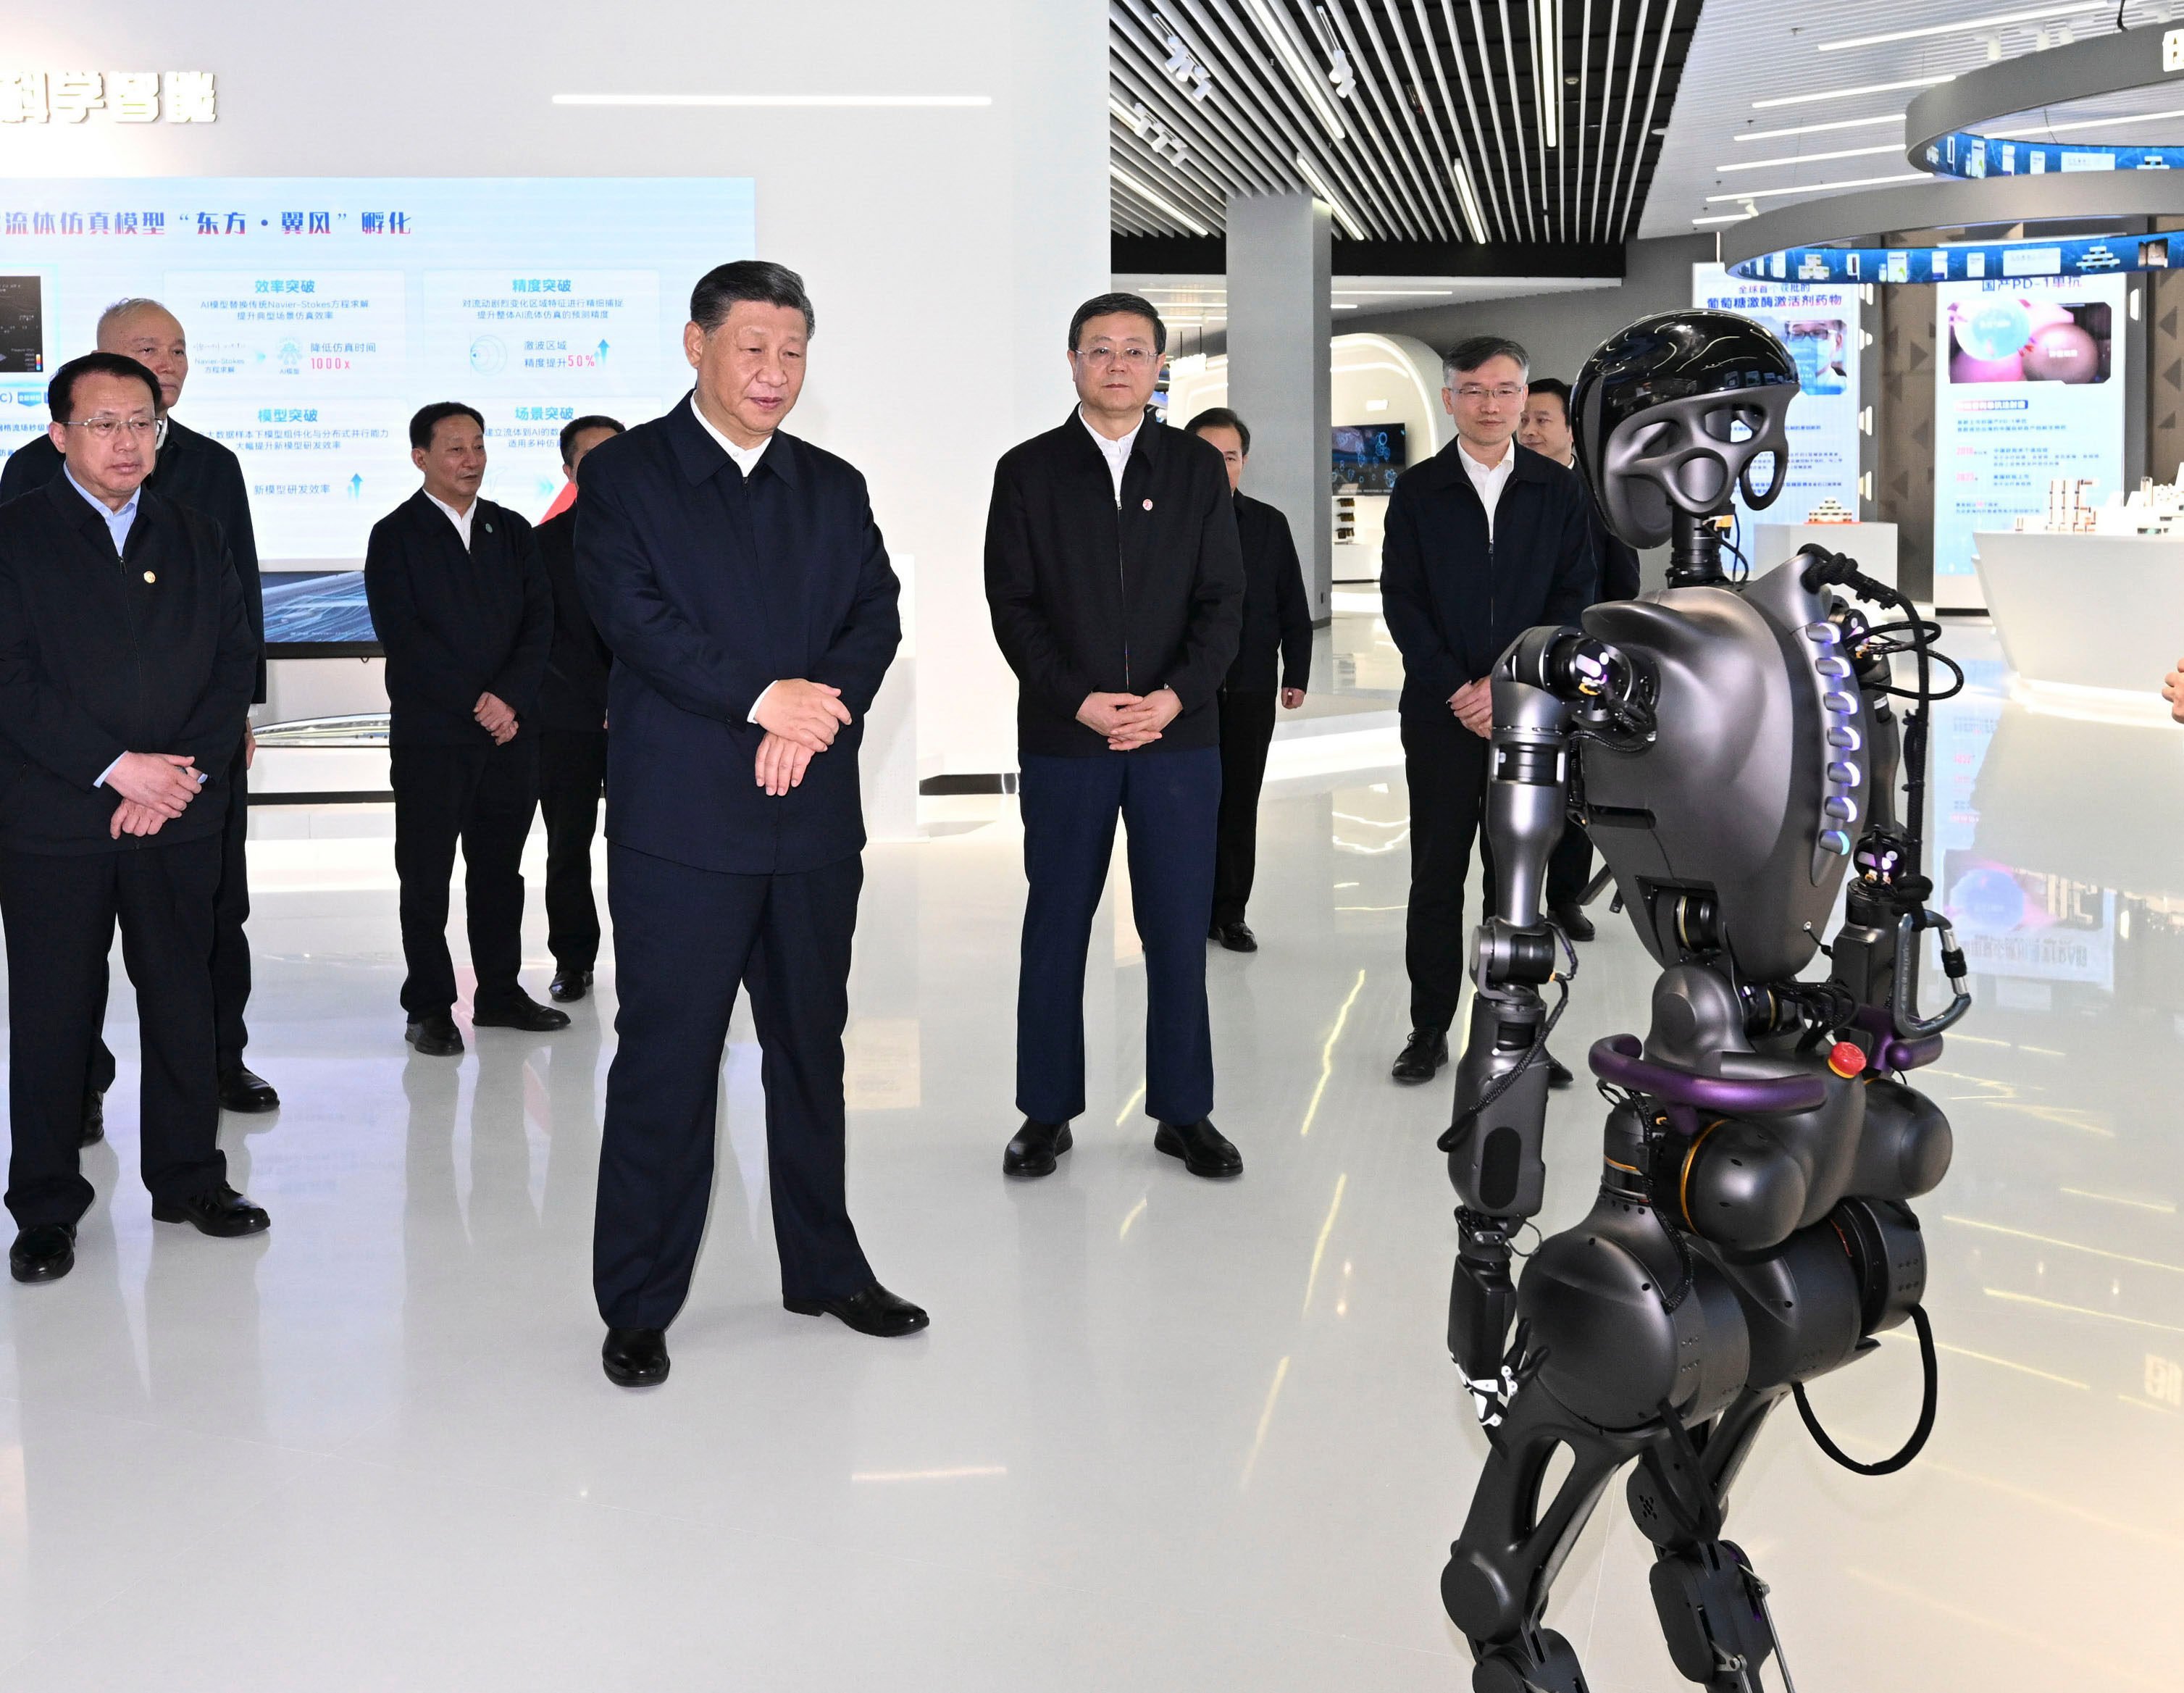 Chinese President Xi Jinping (left) inspects an exhibition on science and tech innovations in Shanghai on November 28. The Chinese leader said at a Politburo meeting on Wednesday that China must use innovation to cultivate new industries. Photo: Xinhua